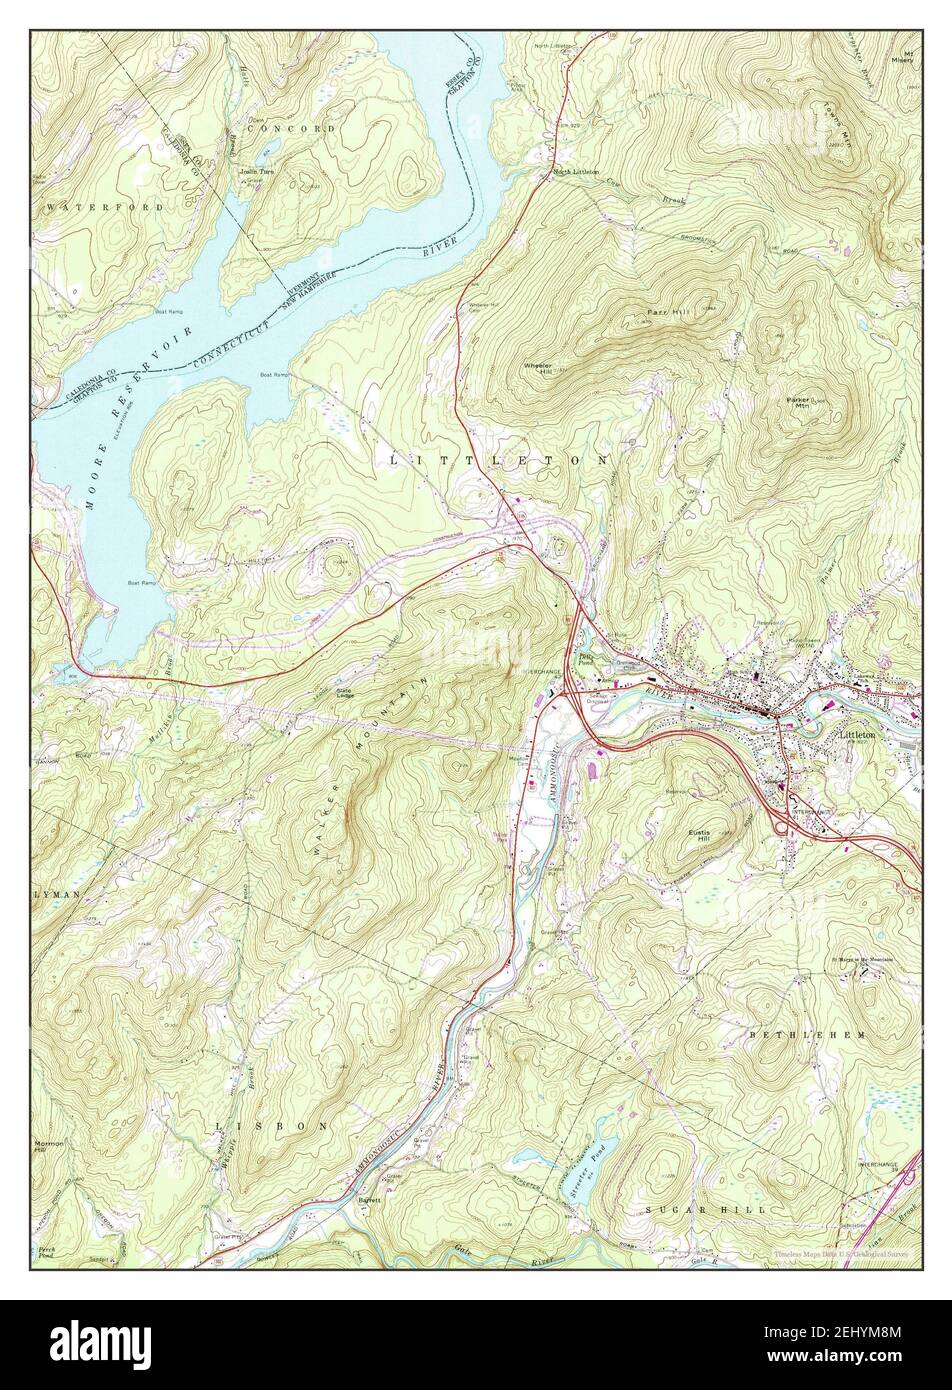 Littleton, New Hampshire, map 1971, 1:24000, United States of America by Timeless Maps, data U.S. Geological Survey Stock Photo